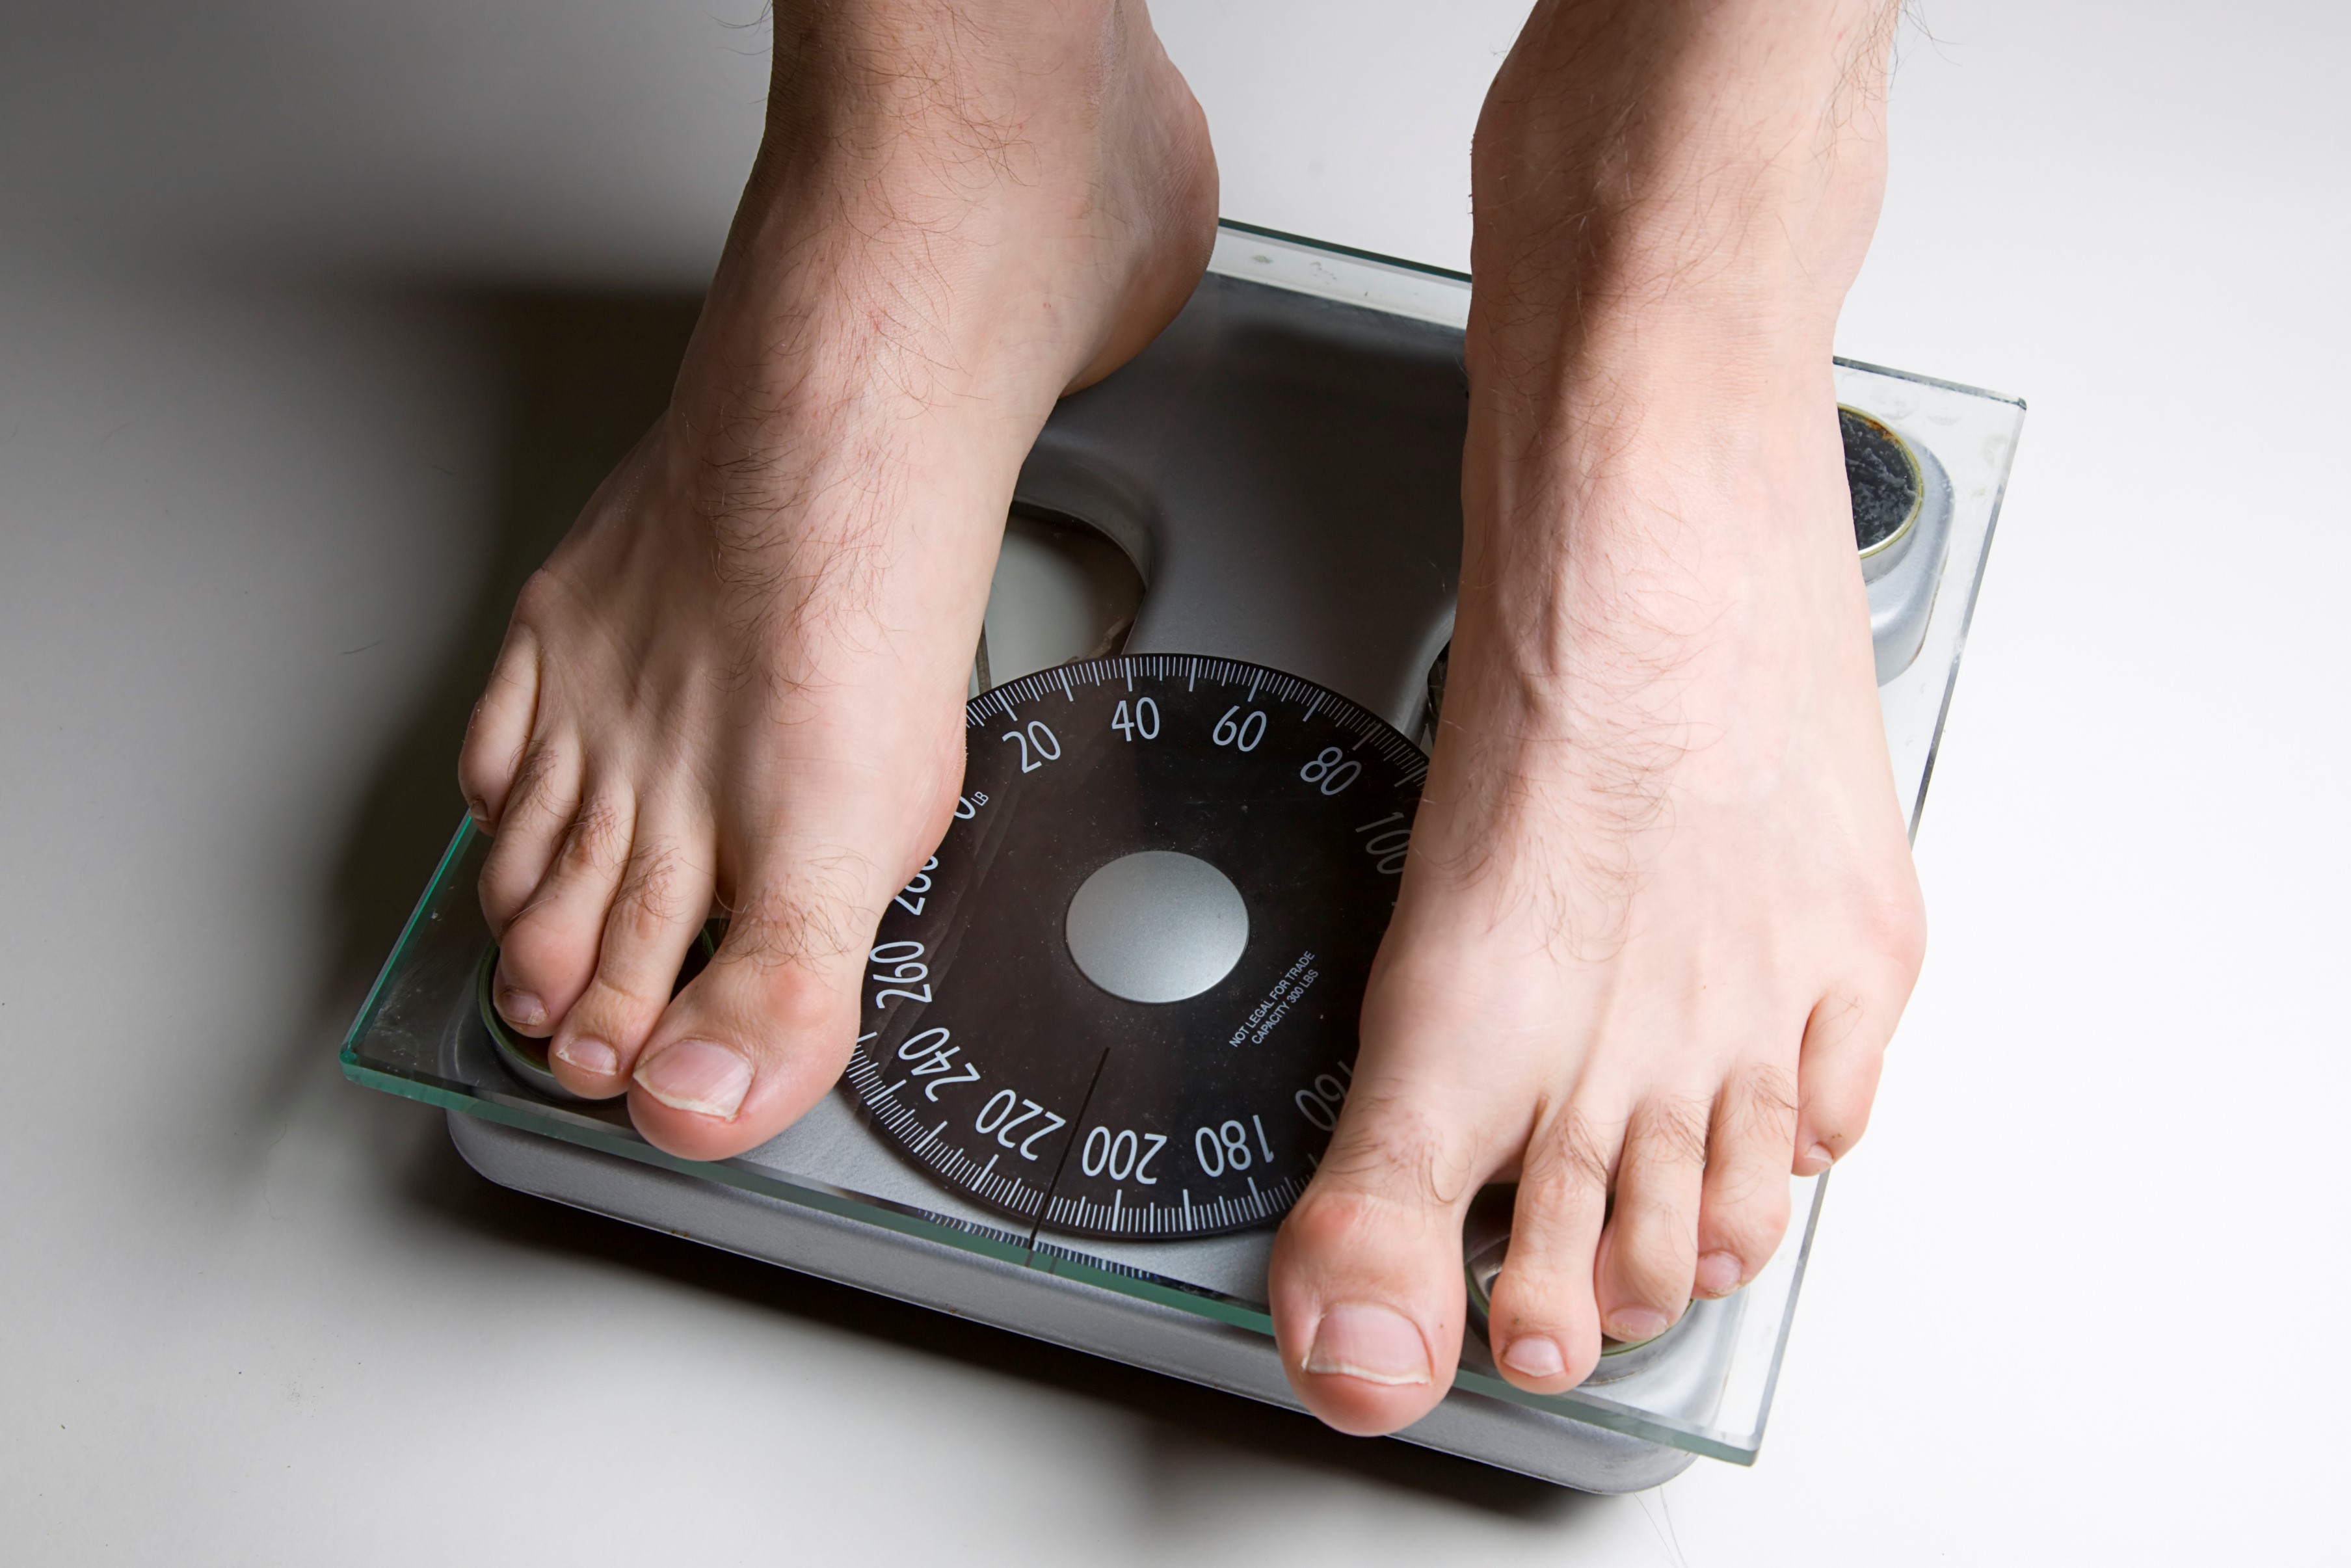 You’re Doing Everything Right, But the Scale Won’t Budge (Part I)